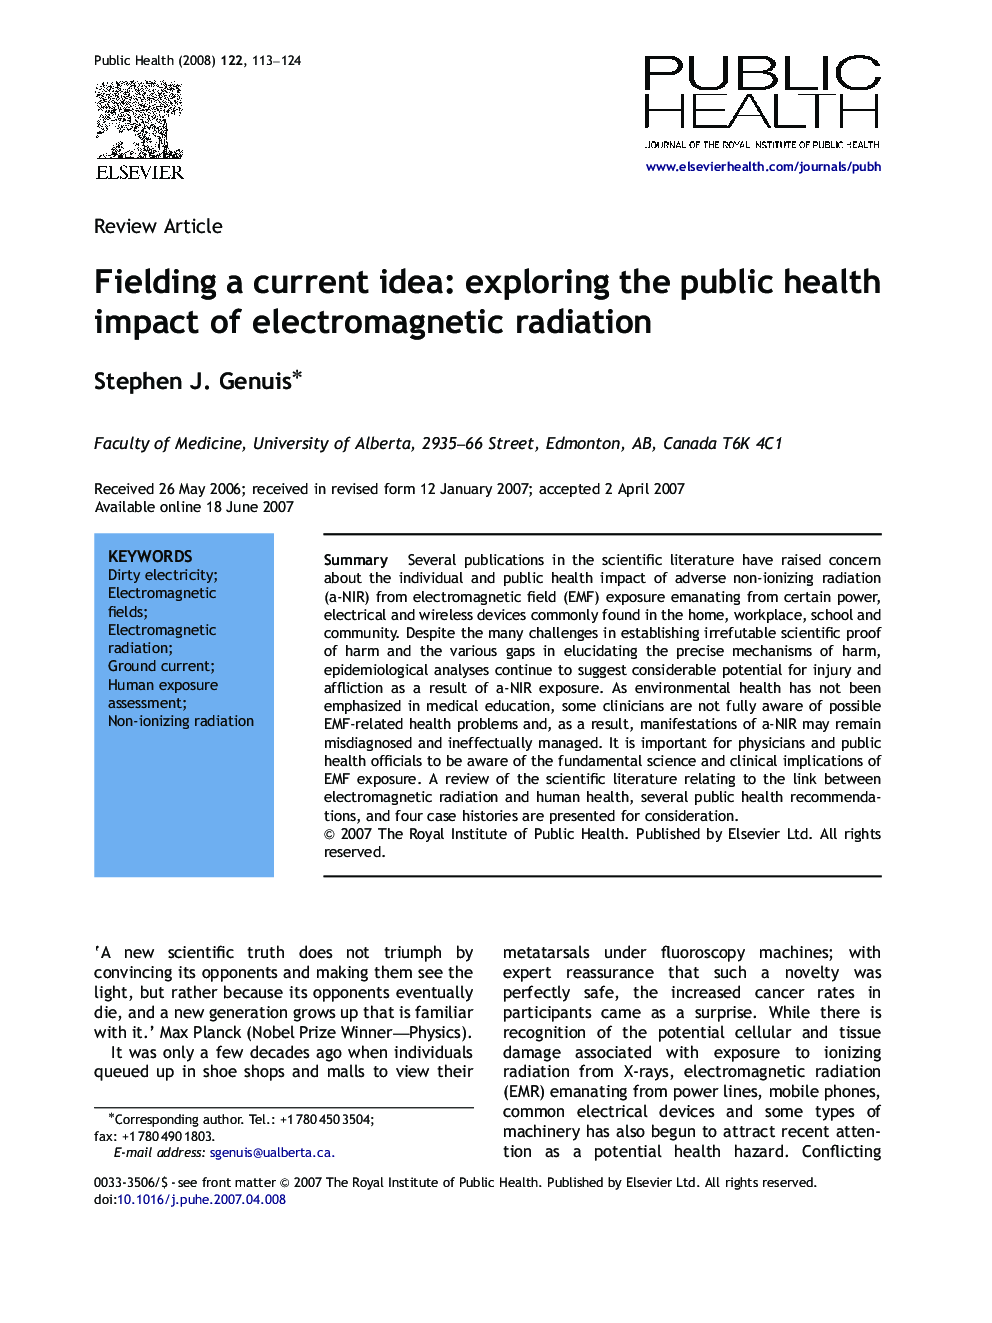 Fielding a current idea: exploring the public health impact of electromagnetic radiation